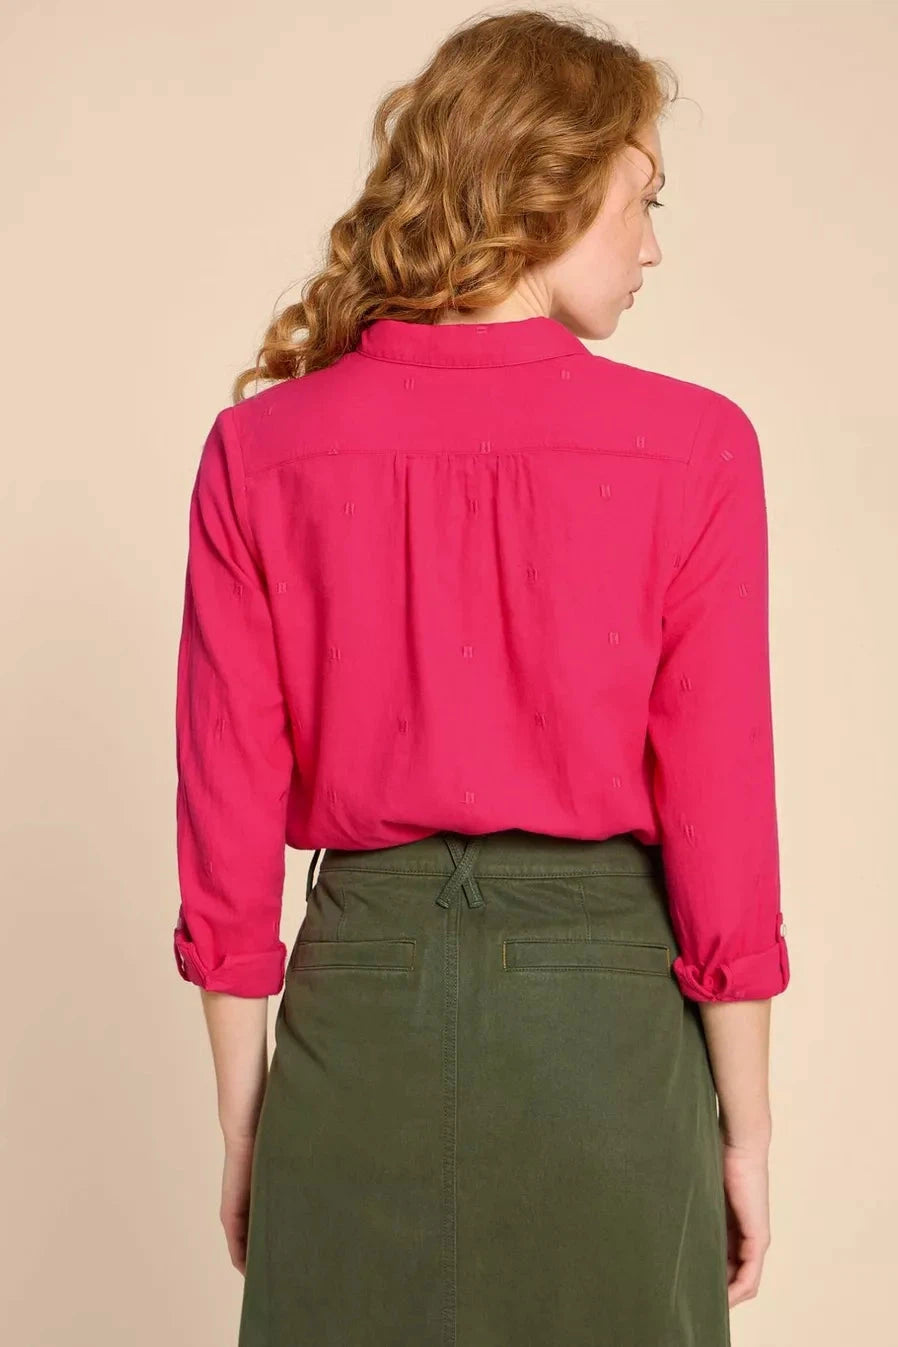 White Stuff Sophie Organic Cotton Shirt in Dark Pink-Womens-Ohh! By Gum - Shop Sustainable